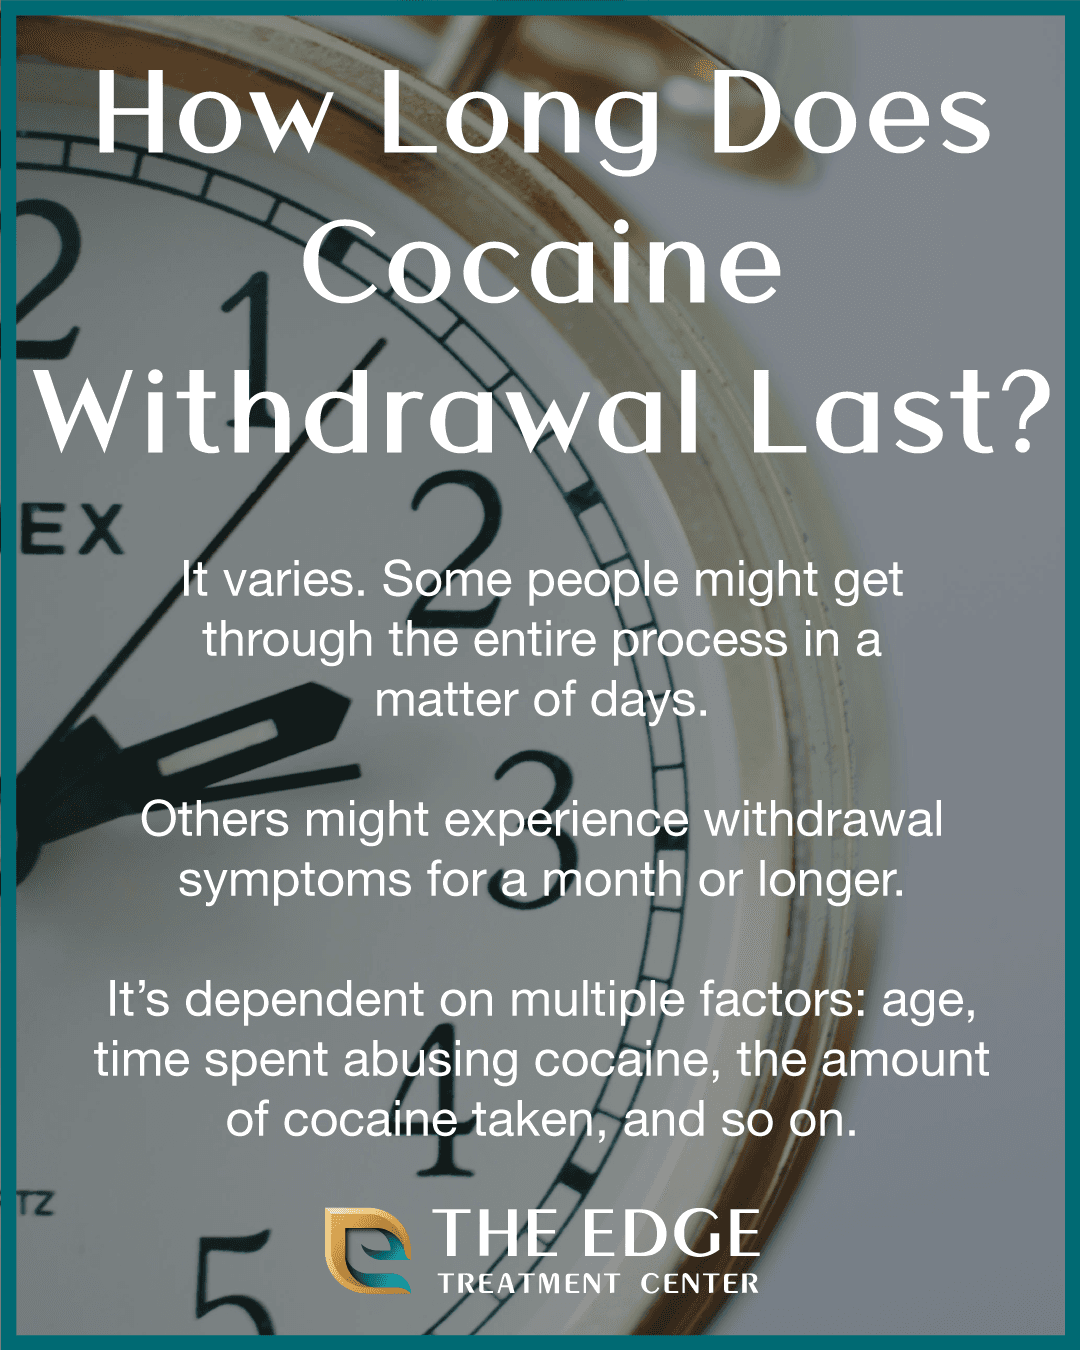 How Long Does Cocaine Withdrawal Last?